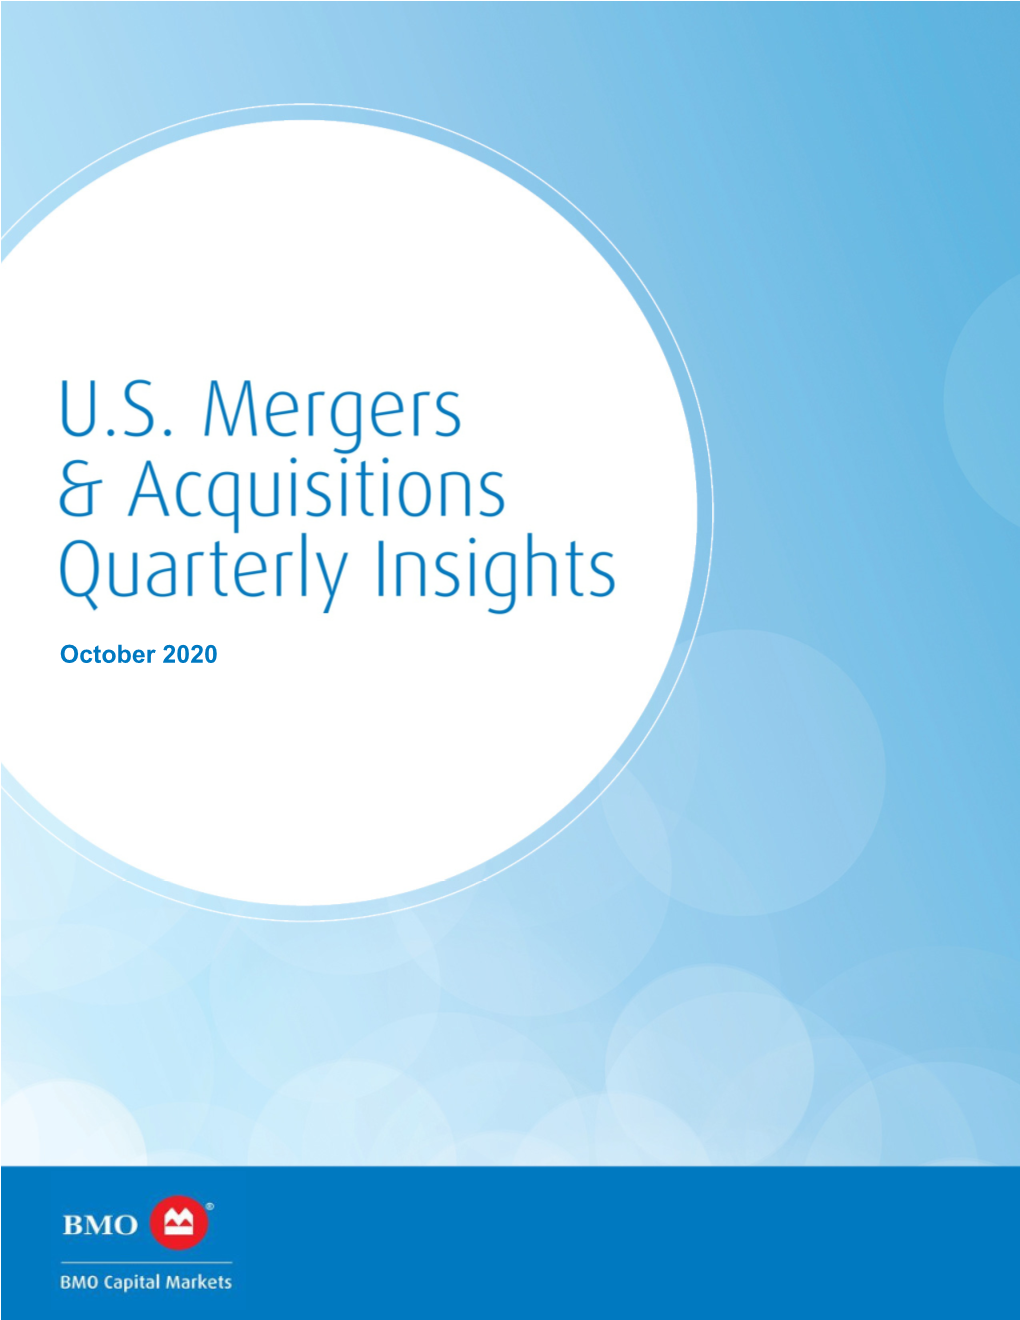 M&A Activity Has Rebounded in Q3 2020